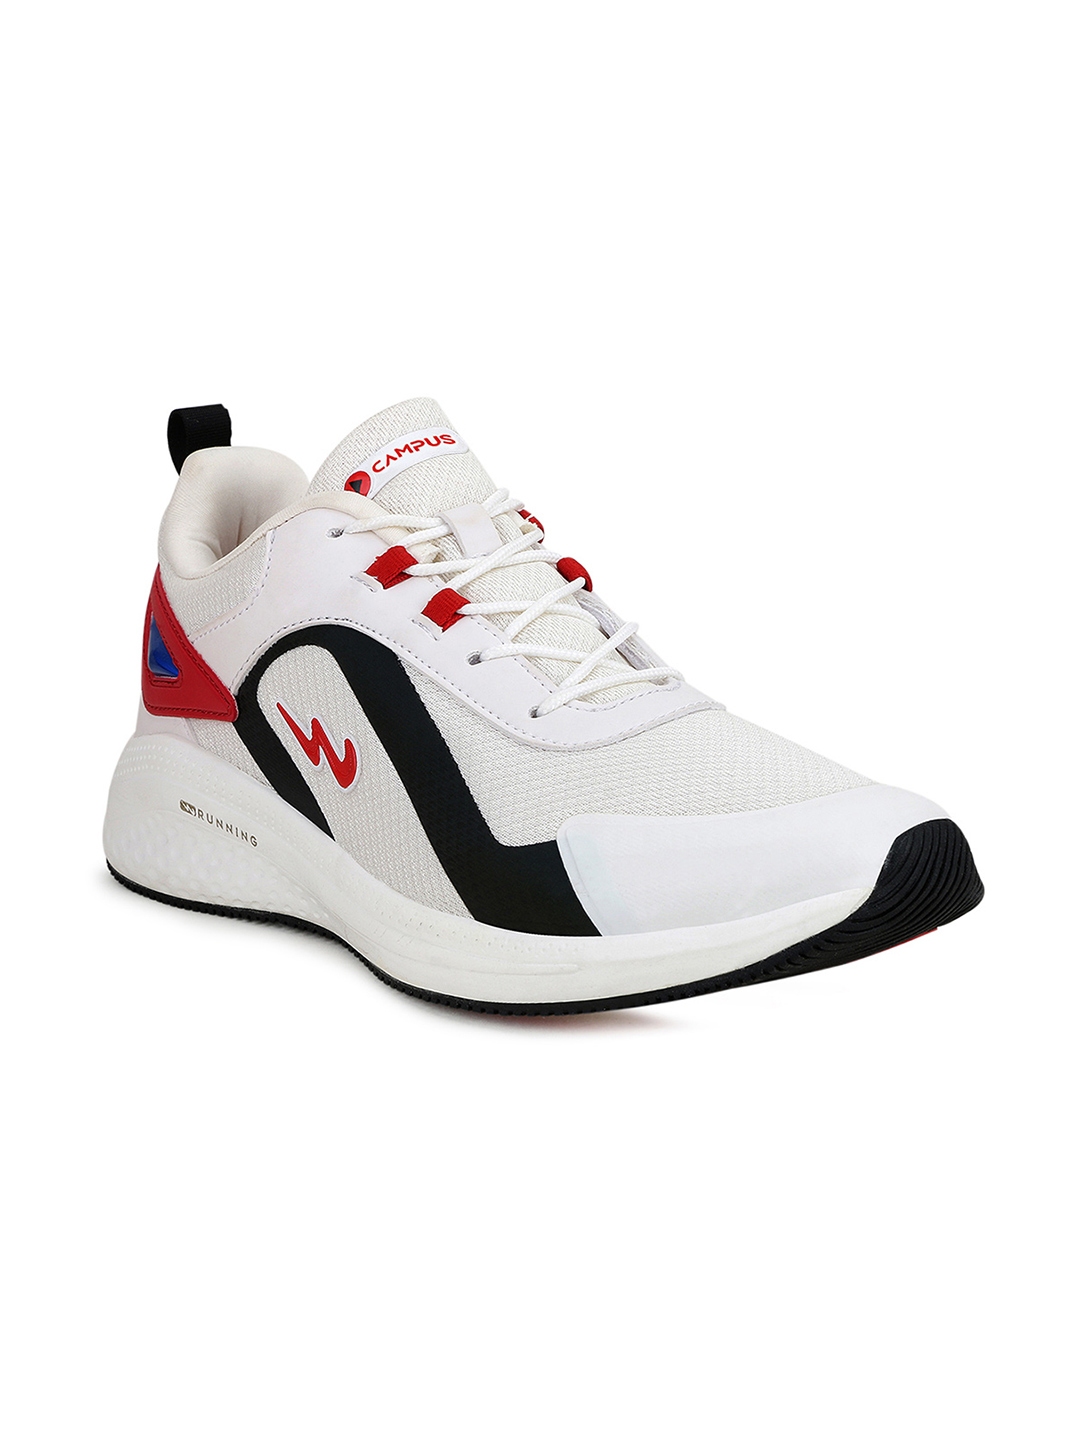 Buy Campus Men Off White Mesh Running Shoes - Sports Shoes for Men ...